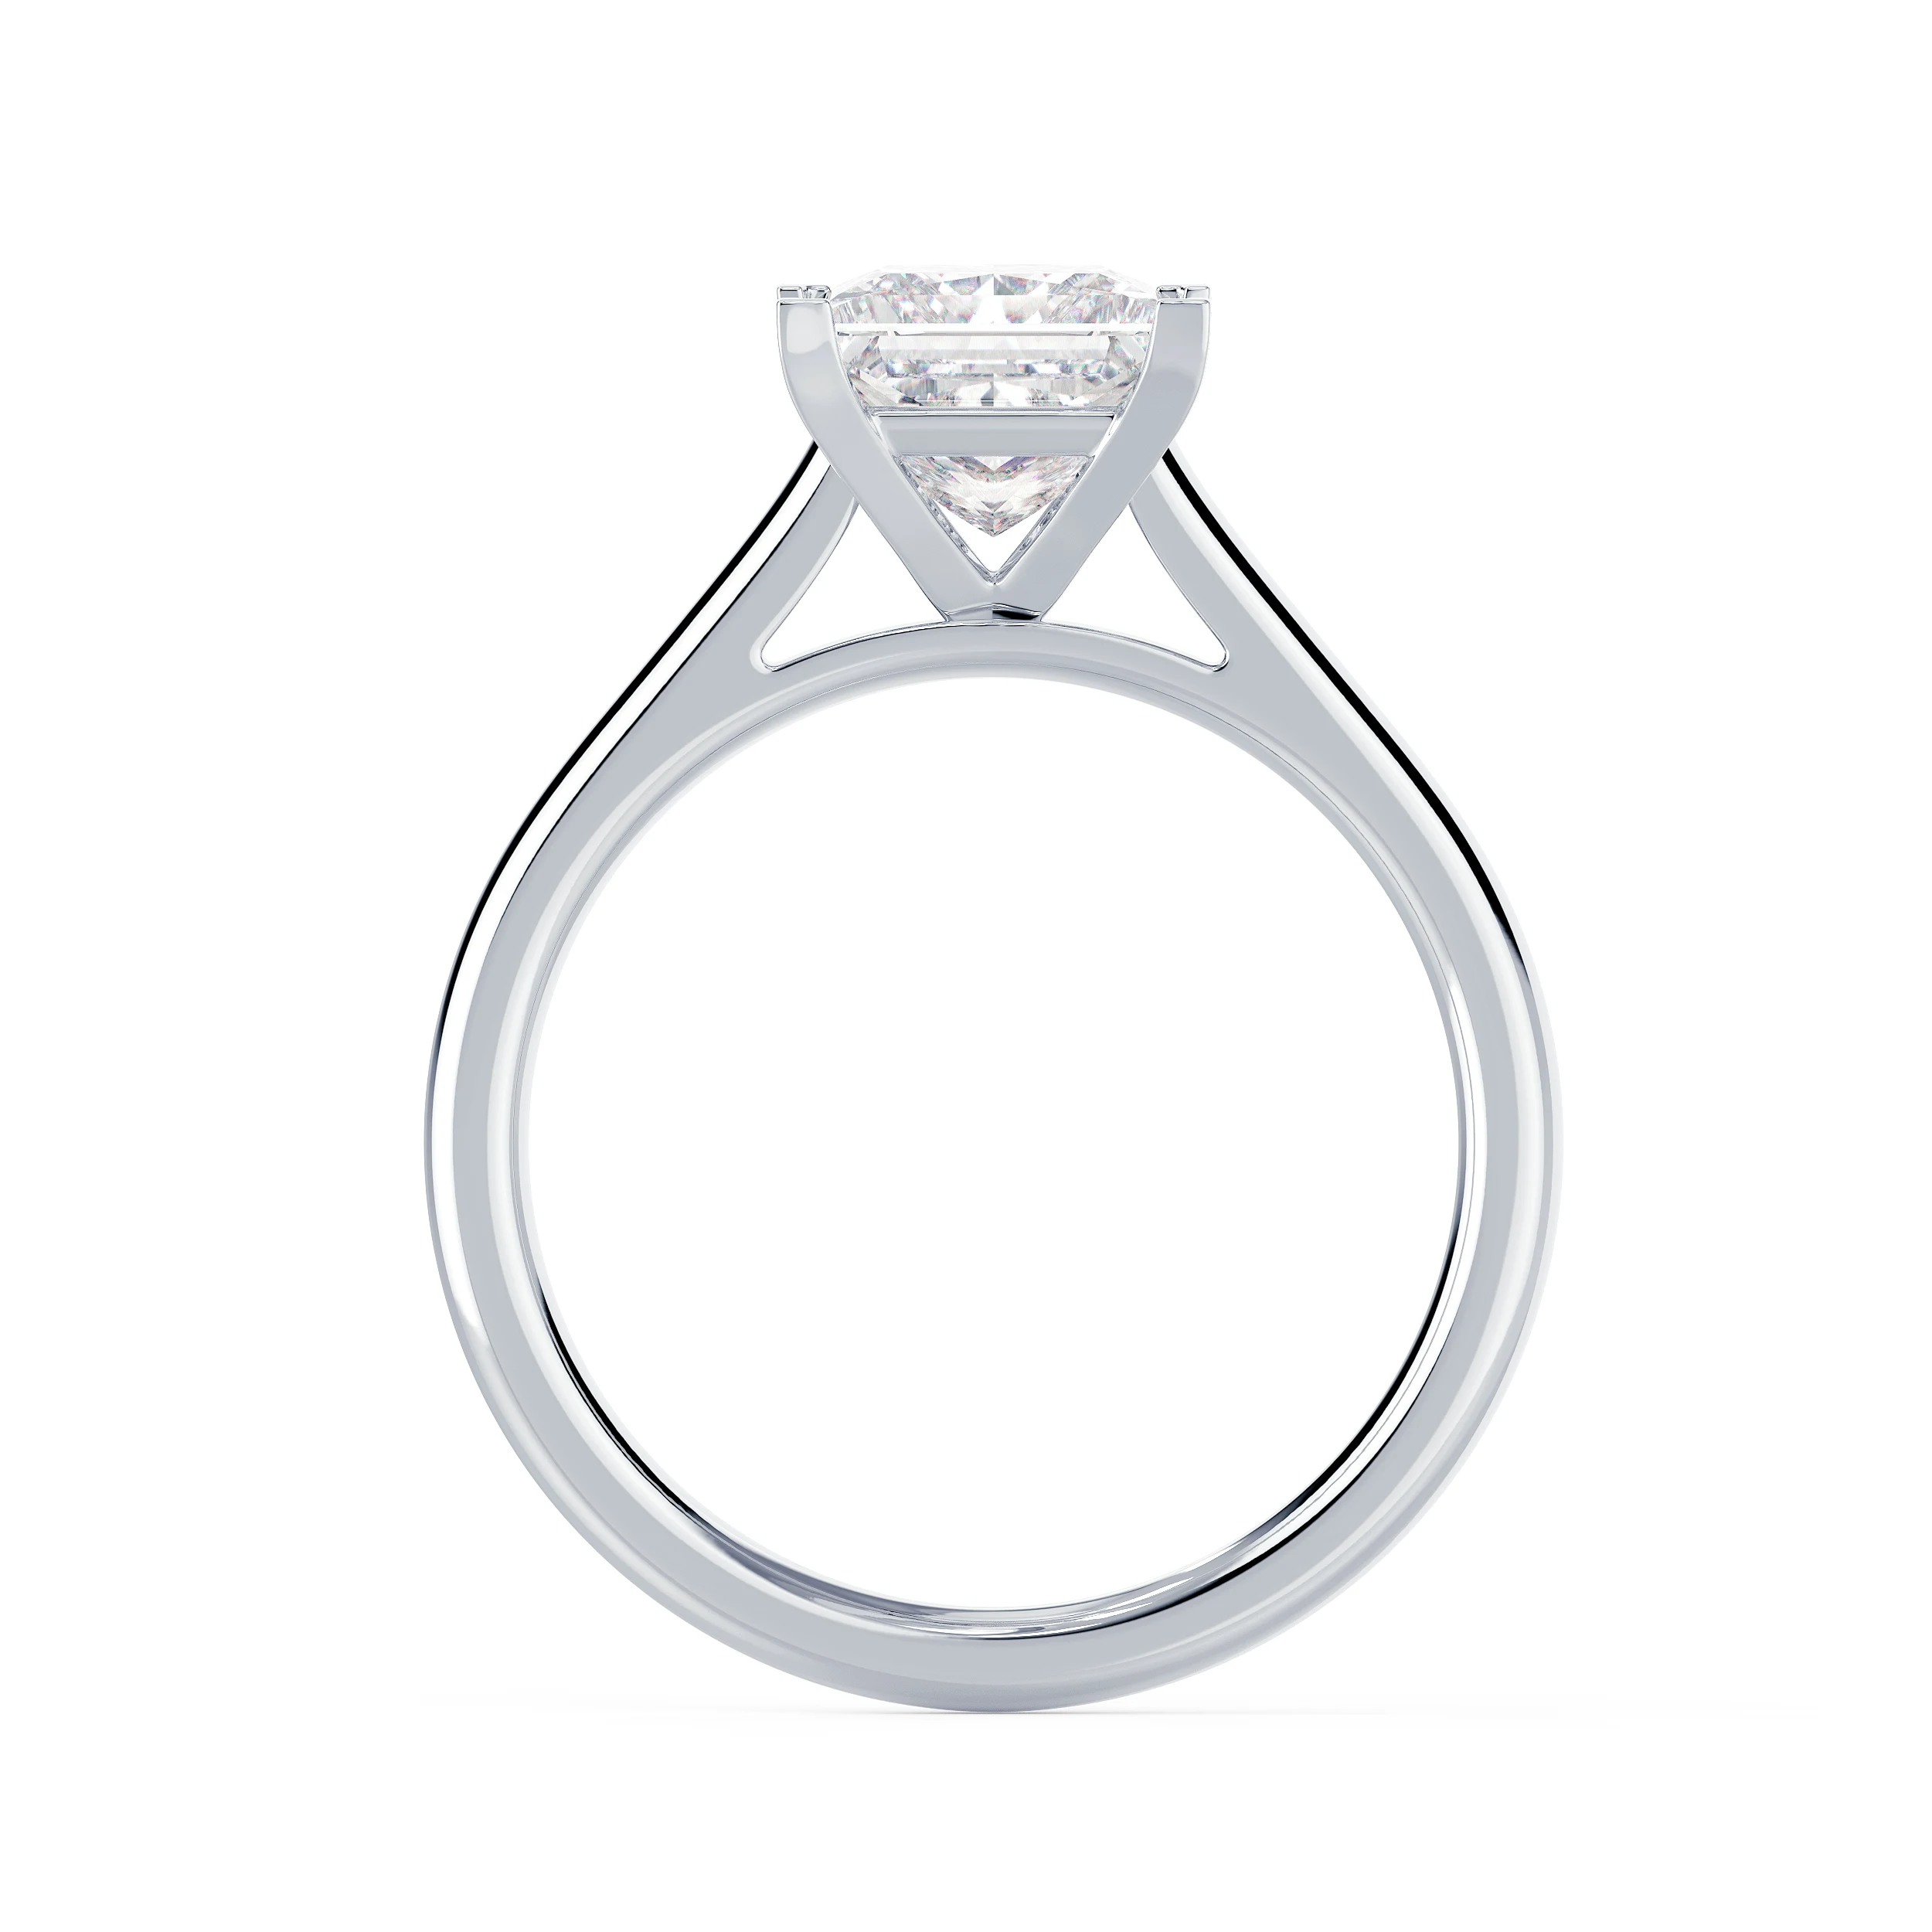 White Gold Princess Cathedral Solitaire Diamond Engagement Ring featuring Diamonds (Profile View)